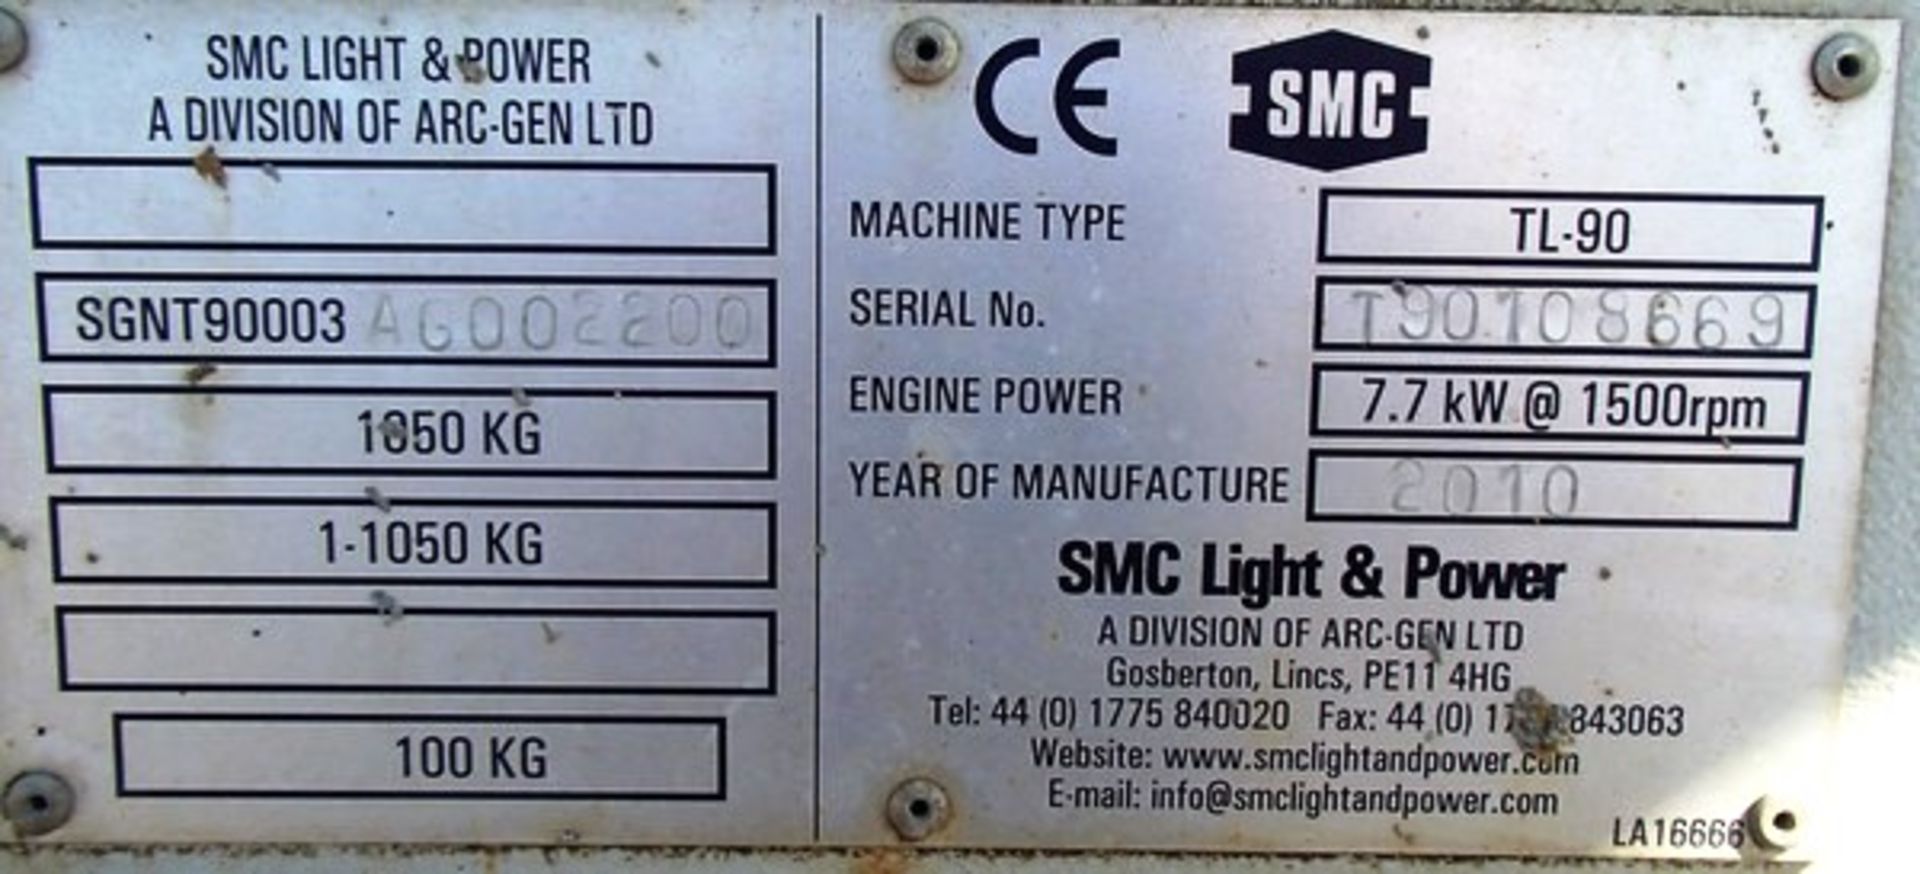 2010 SMC TL-90. SN T90108669 TOWABLE TOWER LIGHTS. ENGINE POWER 7.7KW@1500RPM. 2571 HRS (NOT VERIFIE - Image 5 of 5